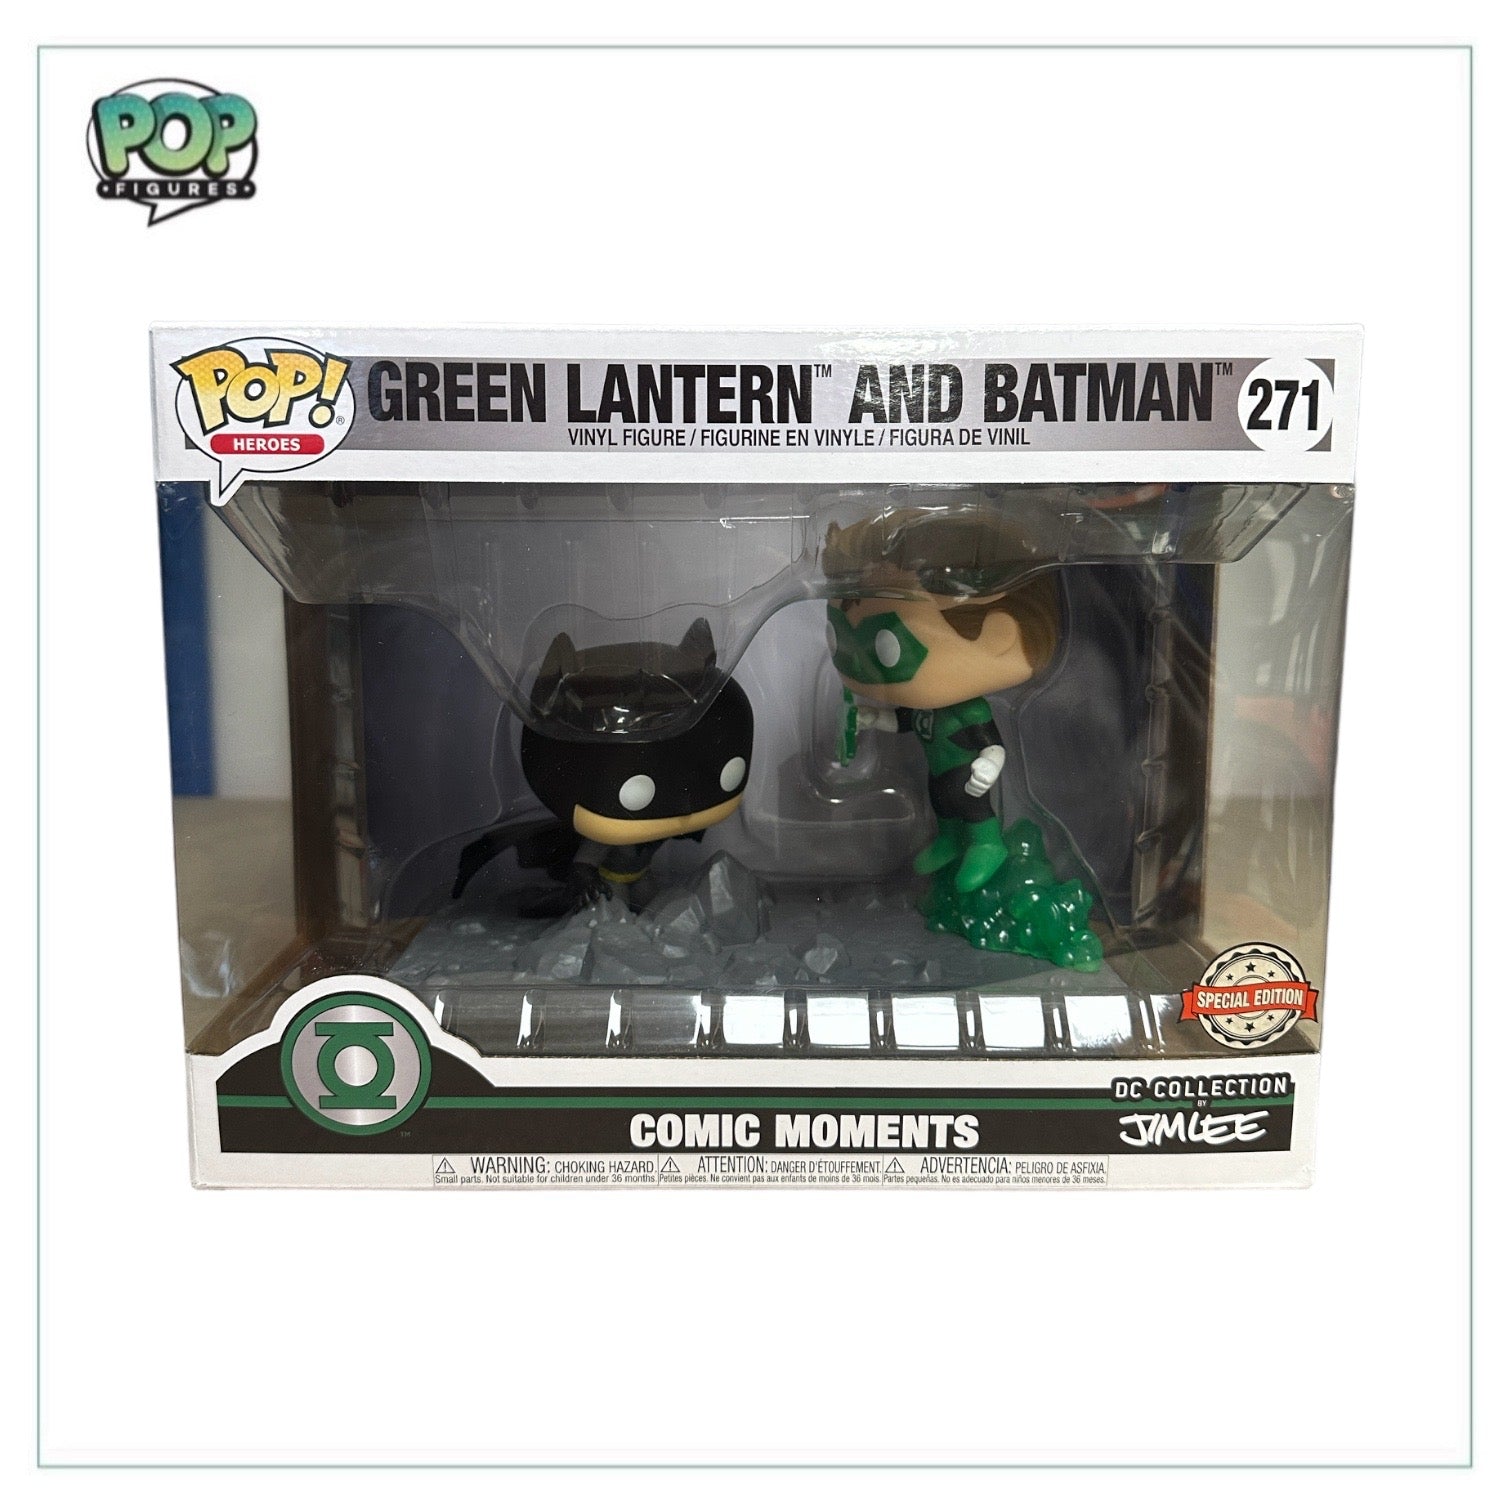 Green Lantern and Batman #271 Funko Pop Comic Moment! - DC Collection Jim Lee - Special Edition